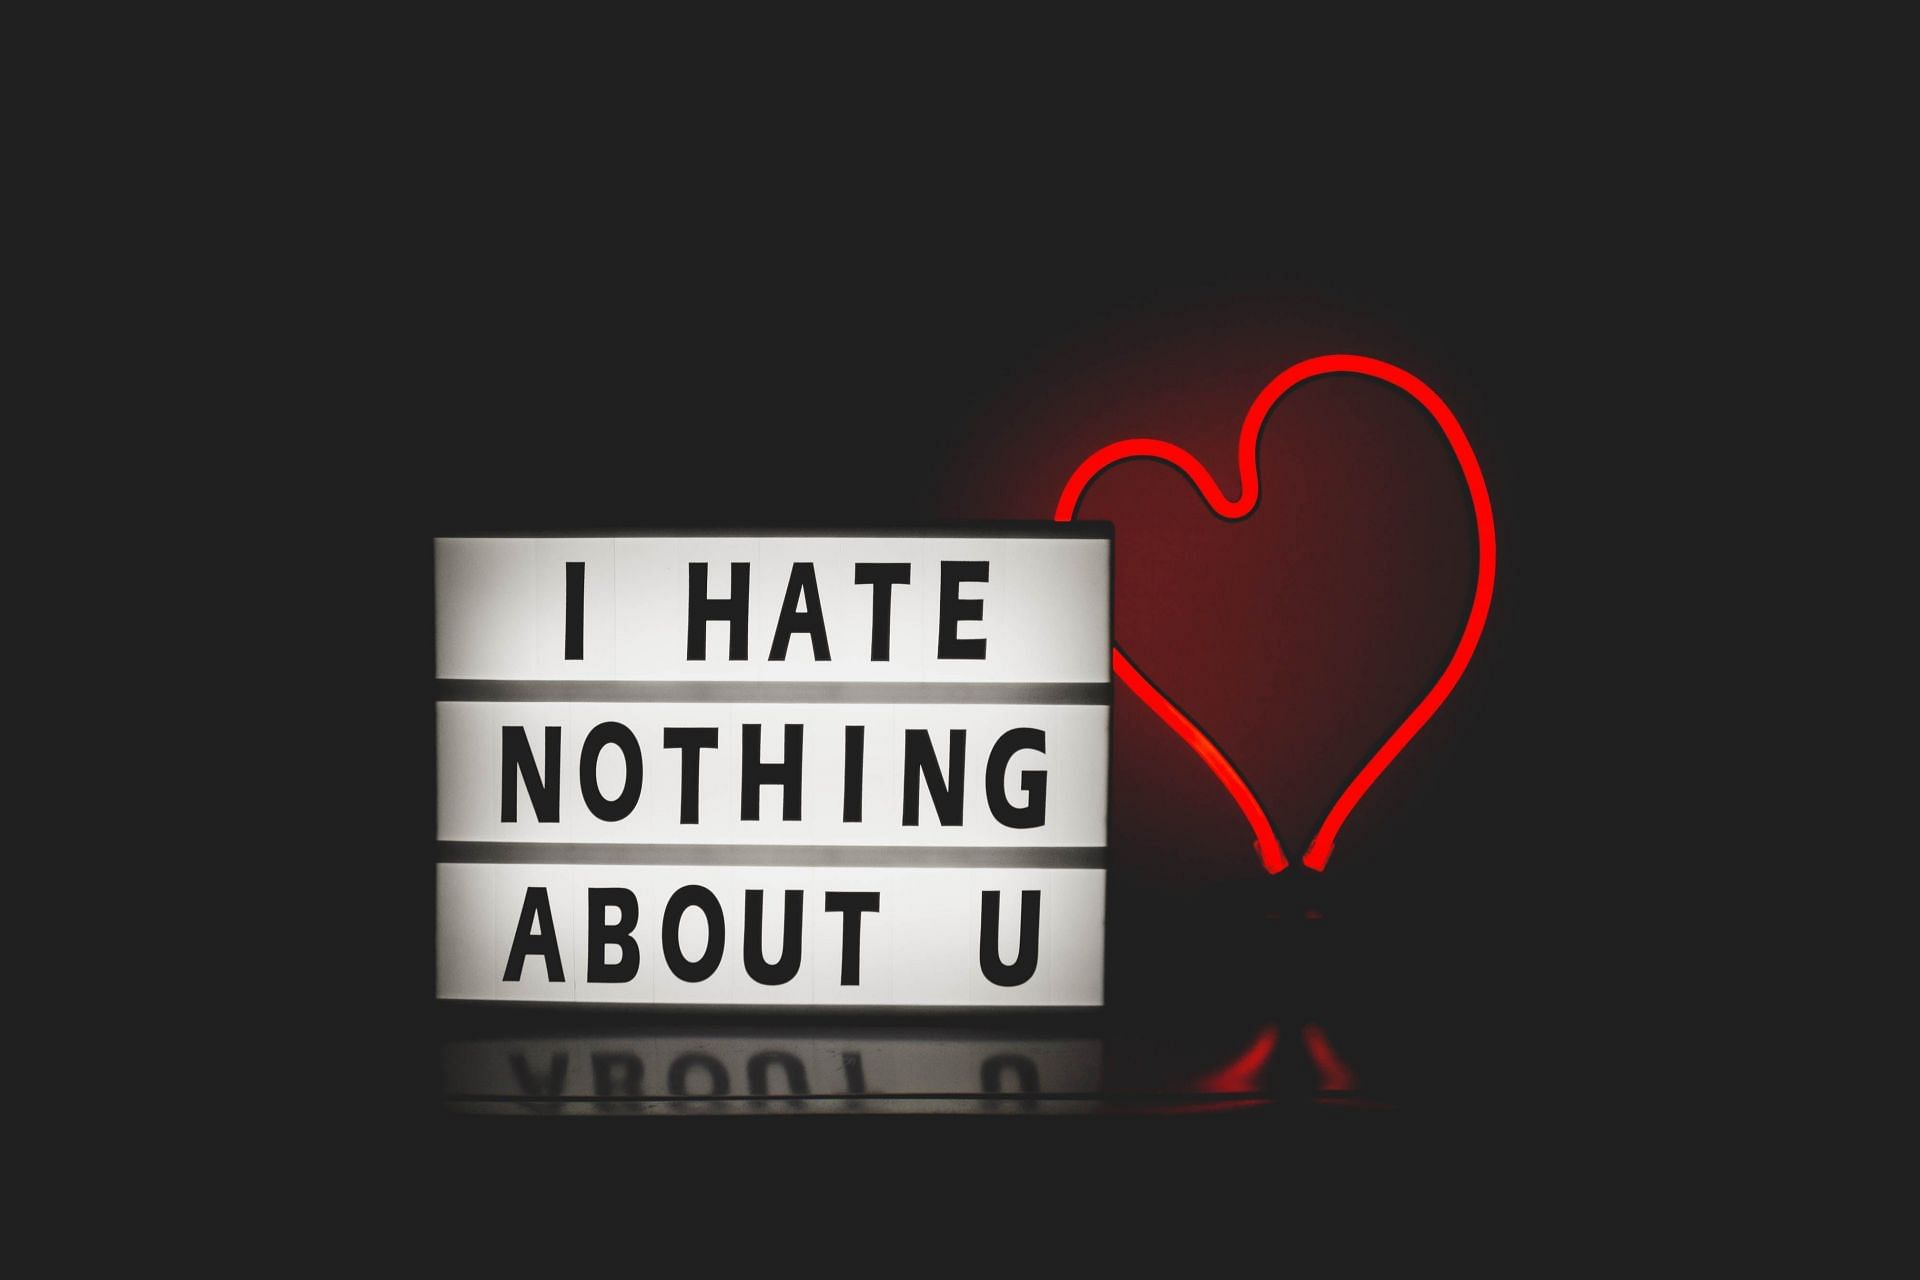 Hate Nothing About You (Image via Pexels)